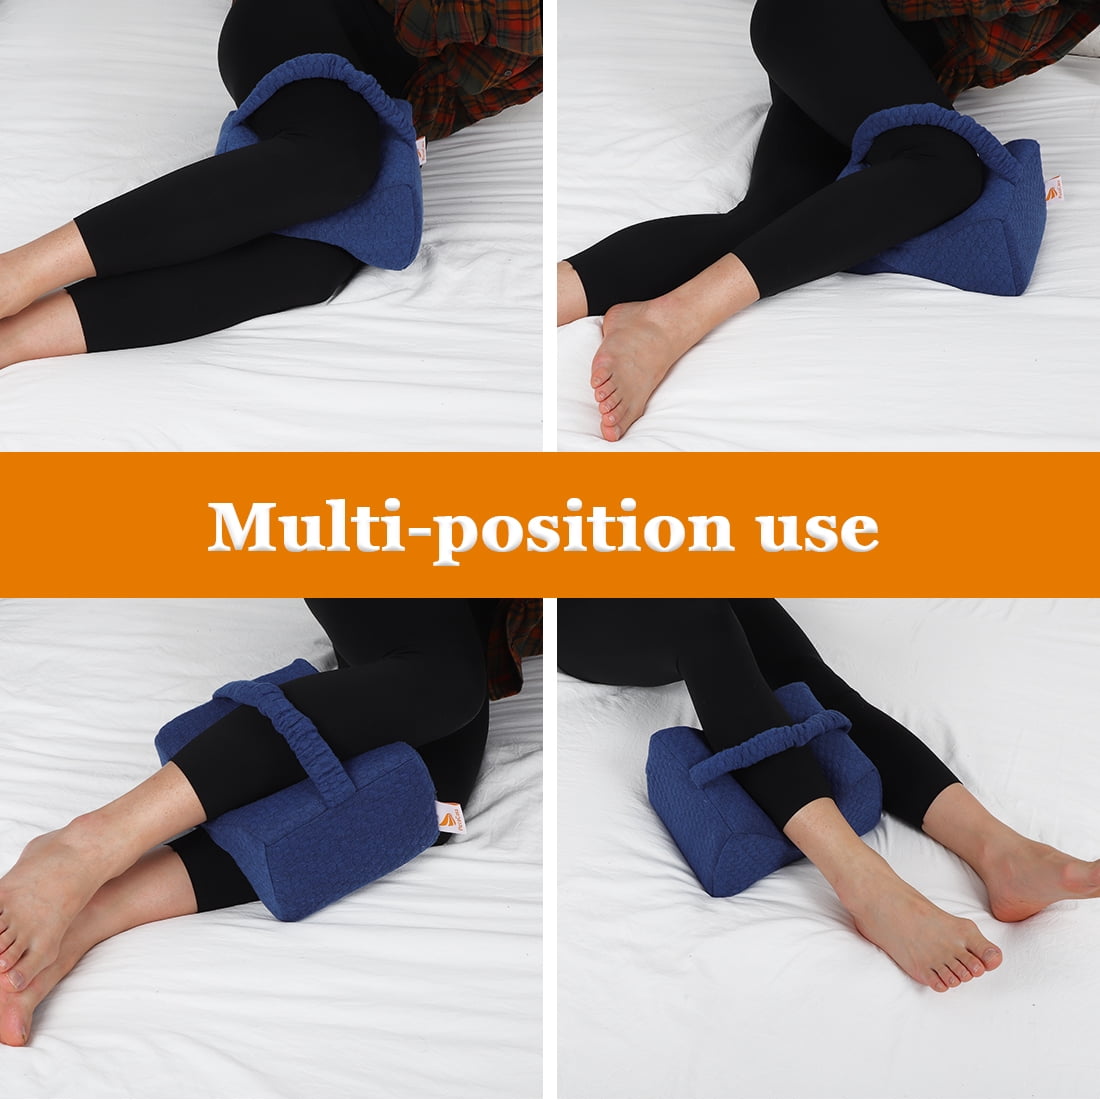 Unique Bargains Body Knee Pillow for Sleeping Between Legs Gray